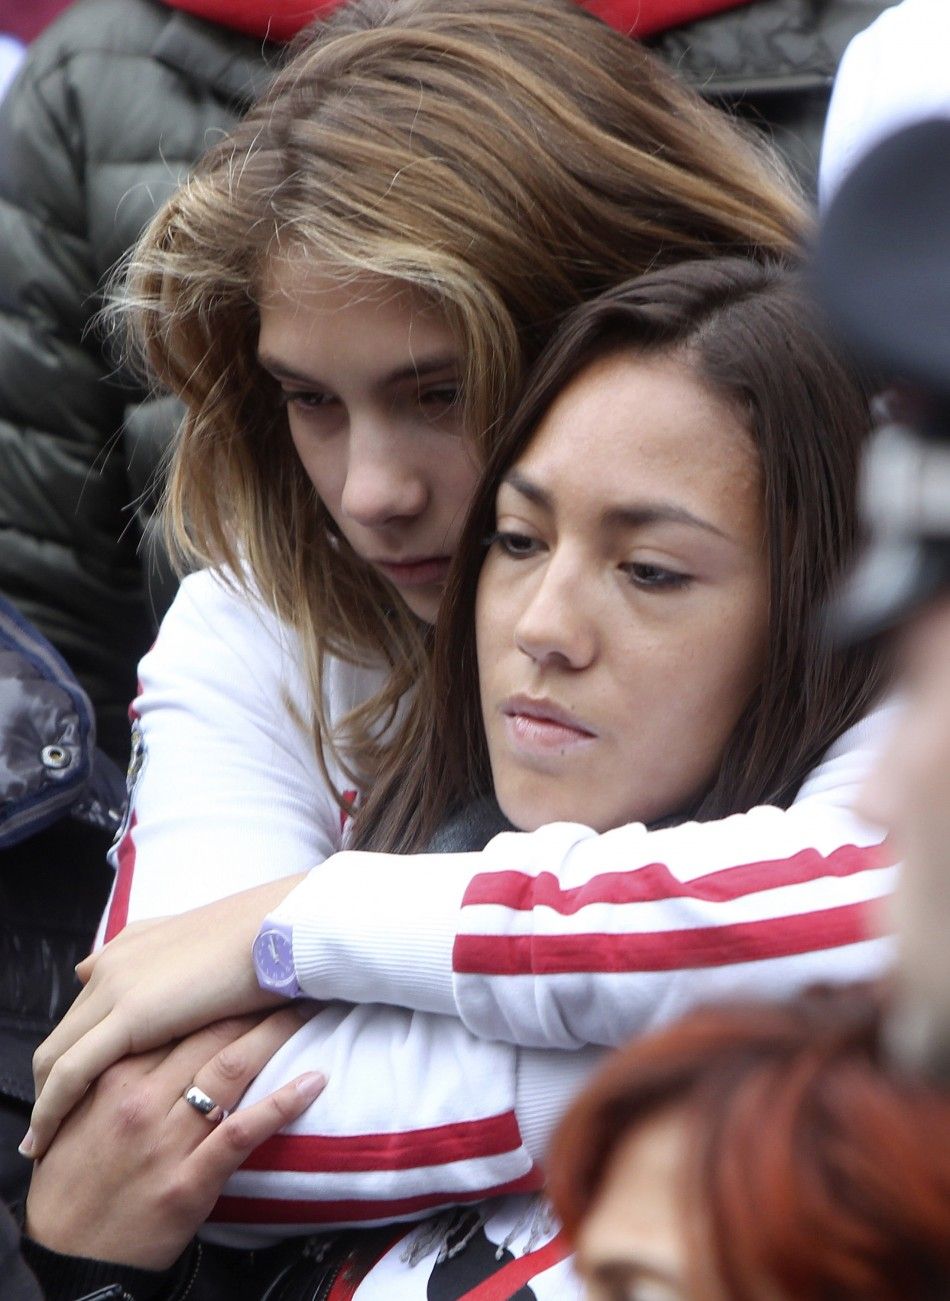 Honda MotoGP rider Marco Simoncellis sister Martina and girlfriend Kate react at the end of the funeral service in Coriano